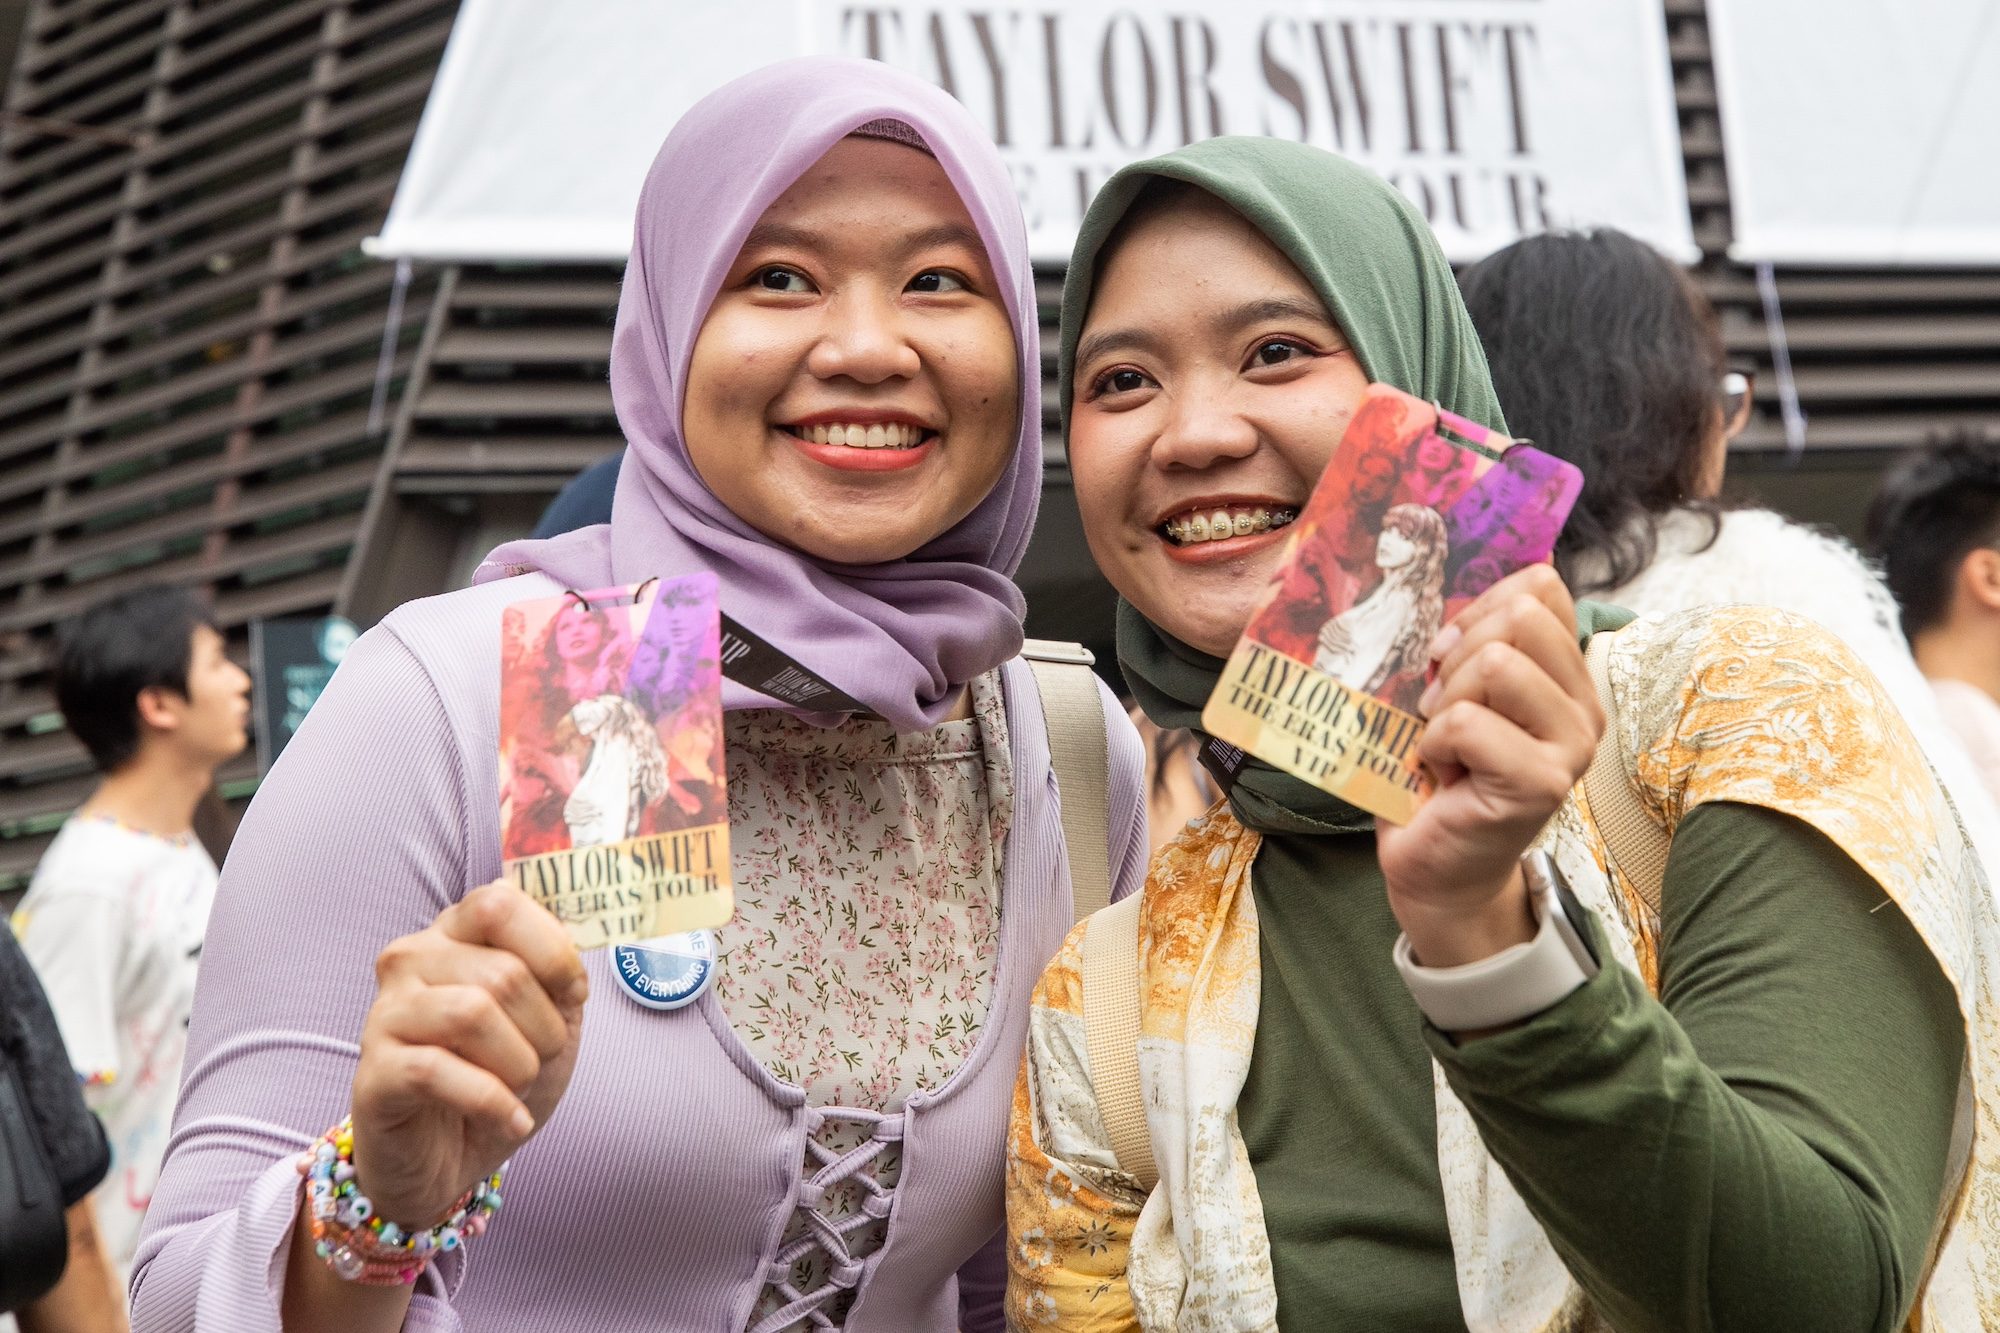 Taylor Swift fans pose ahead of her first concert in Singapore. Gulf officials could work together to attract major artists for 'Arabian tours'